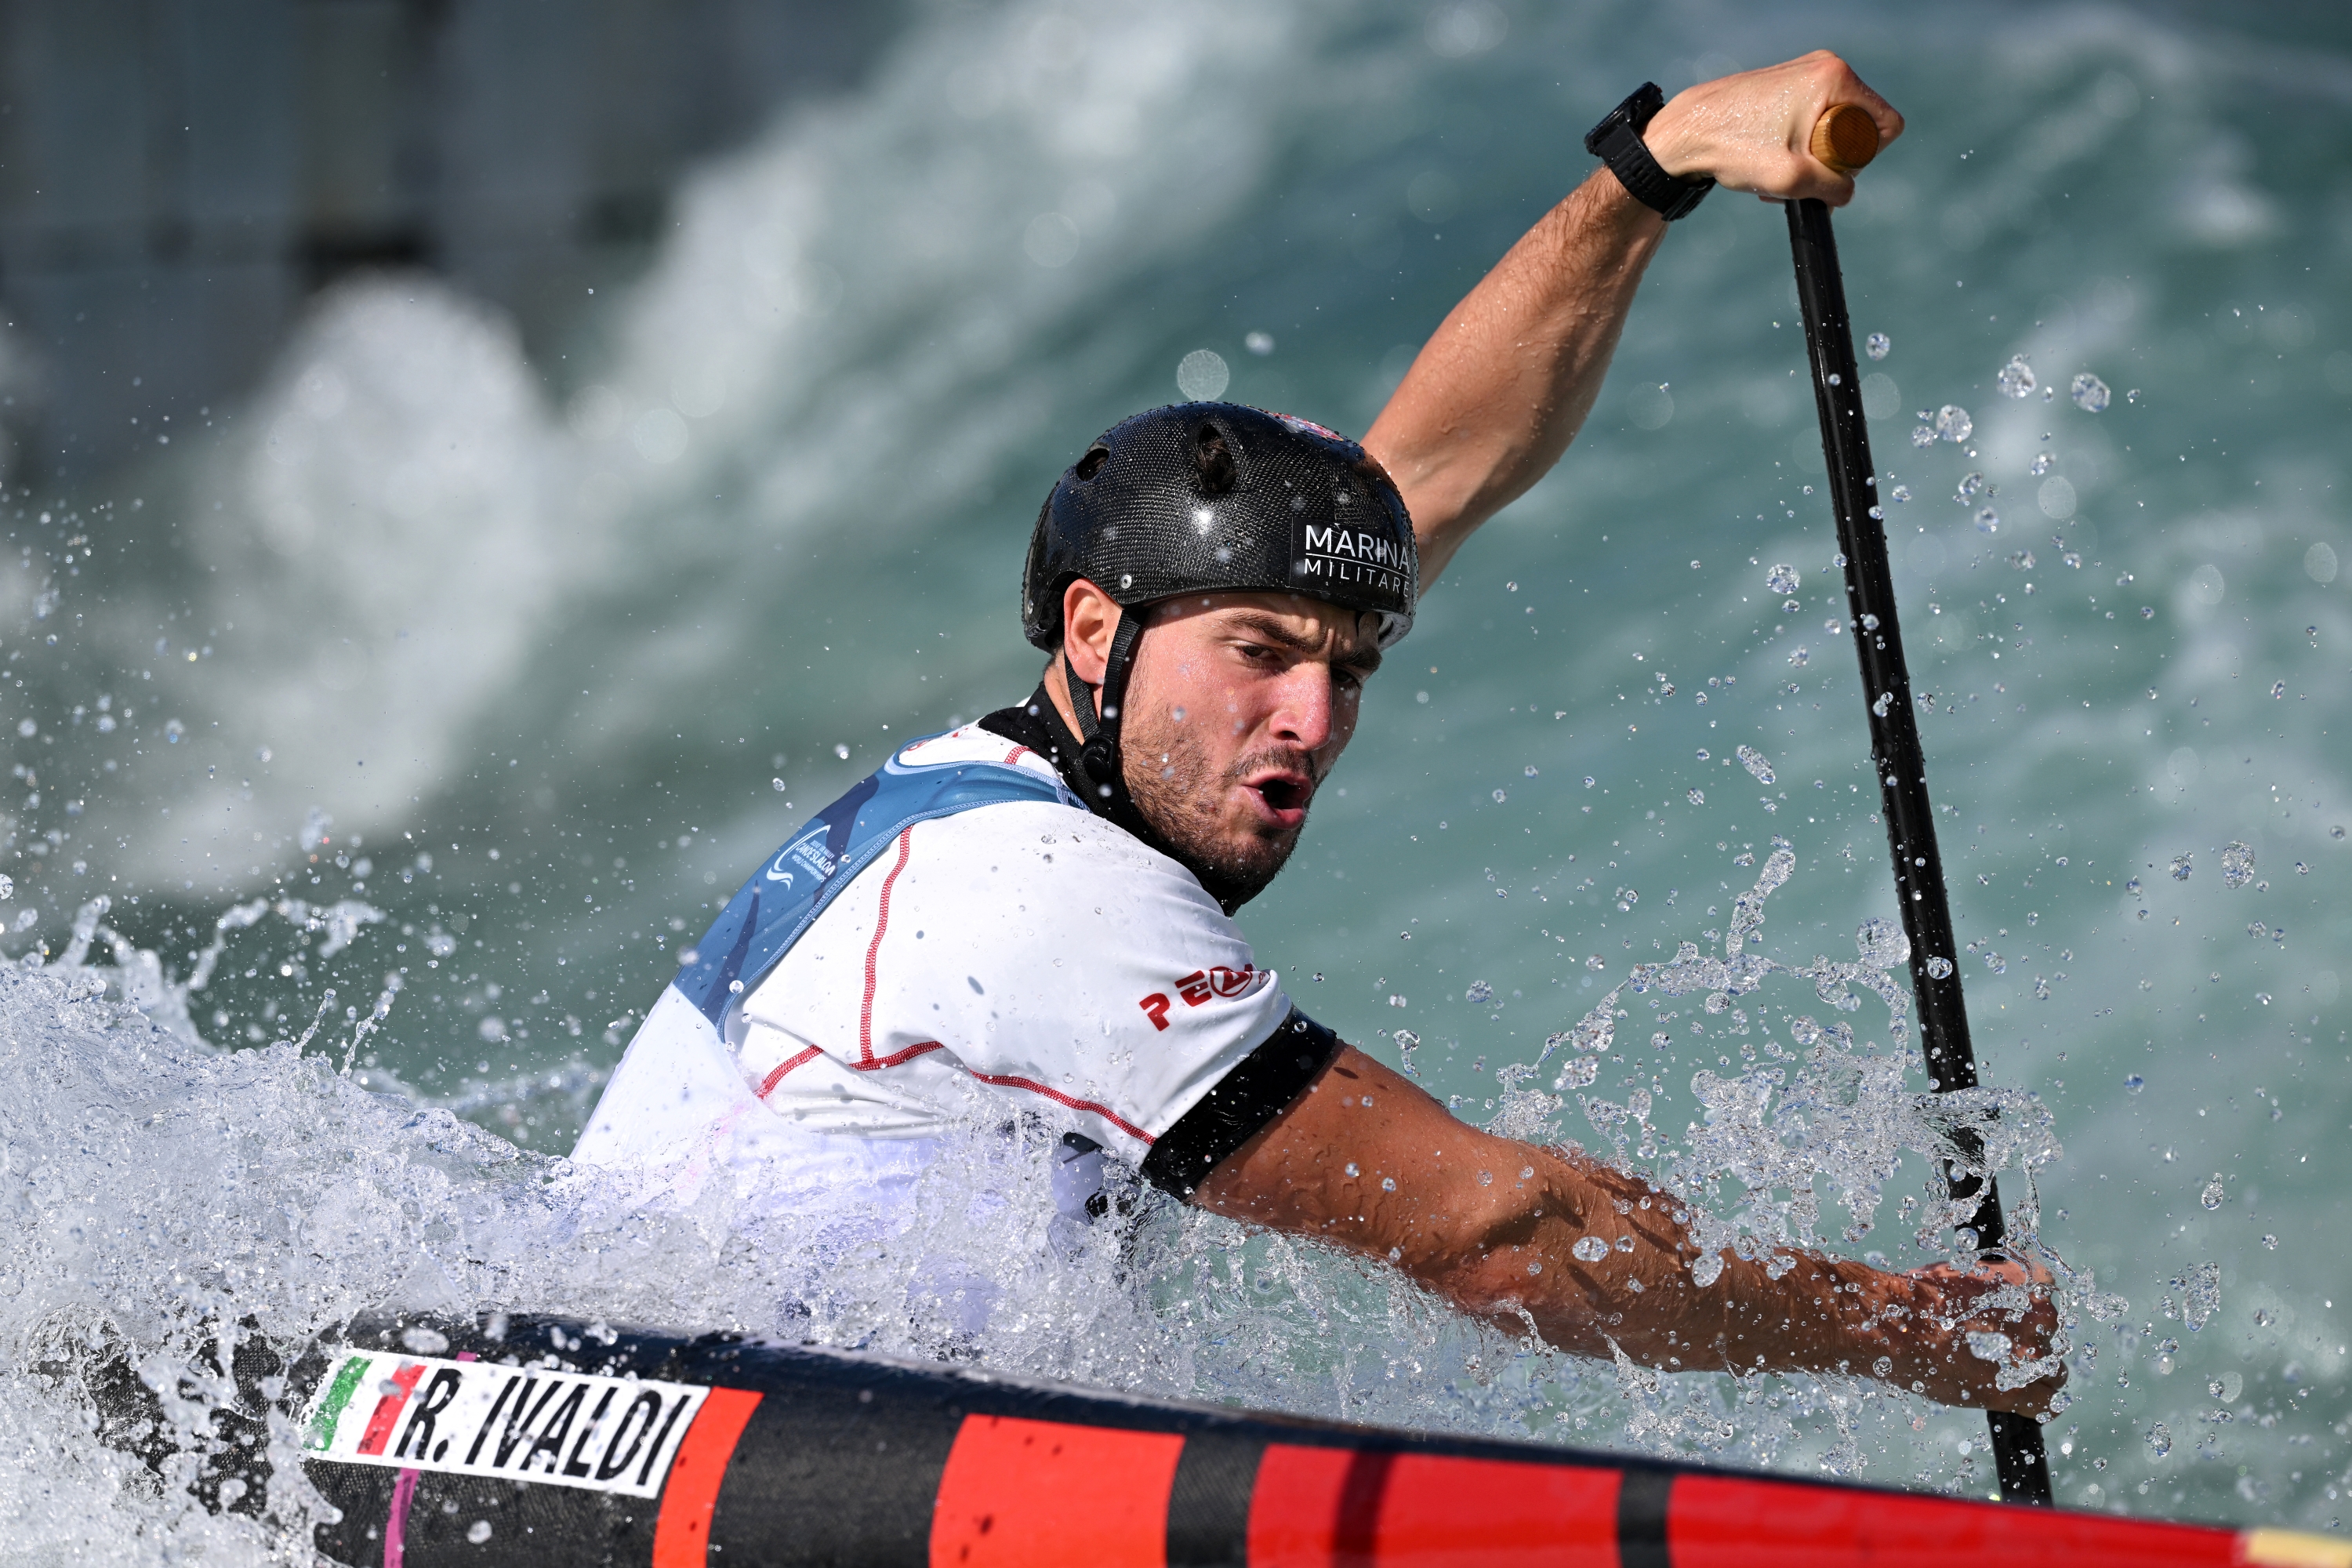 LONDON, ENGLAND - SEPTEMBER 22: Raffaello Ivaldi of Italy competes in the Men's Canoe Semi-Final at the 2023 ICF Canoe Slalom World Championships at Lee Valley White Water Centre on September 22, 2023 in London, England. (Photo by Justin Setterfield/Getty Images)